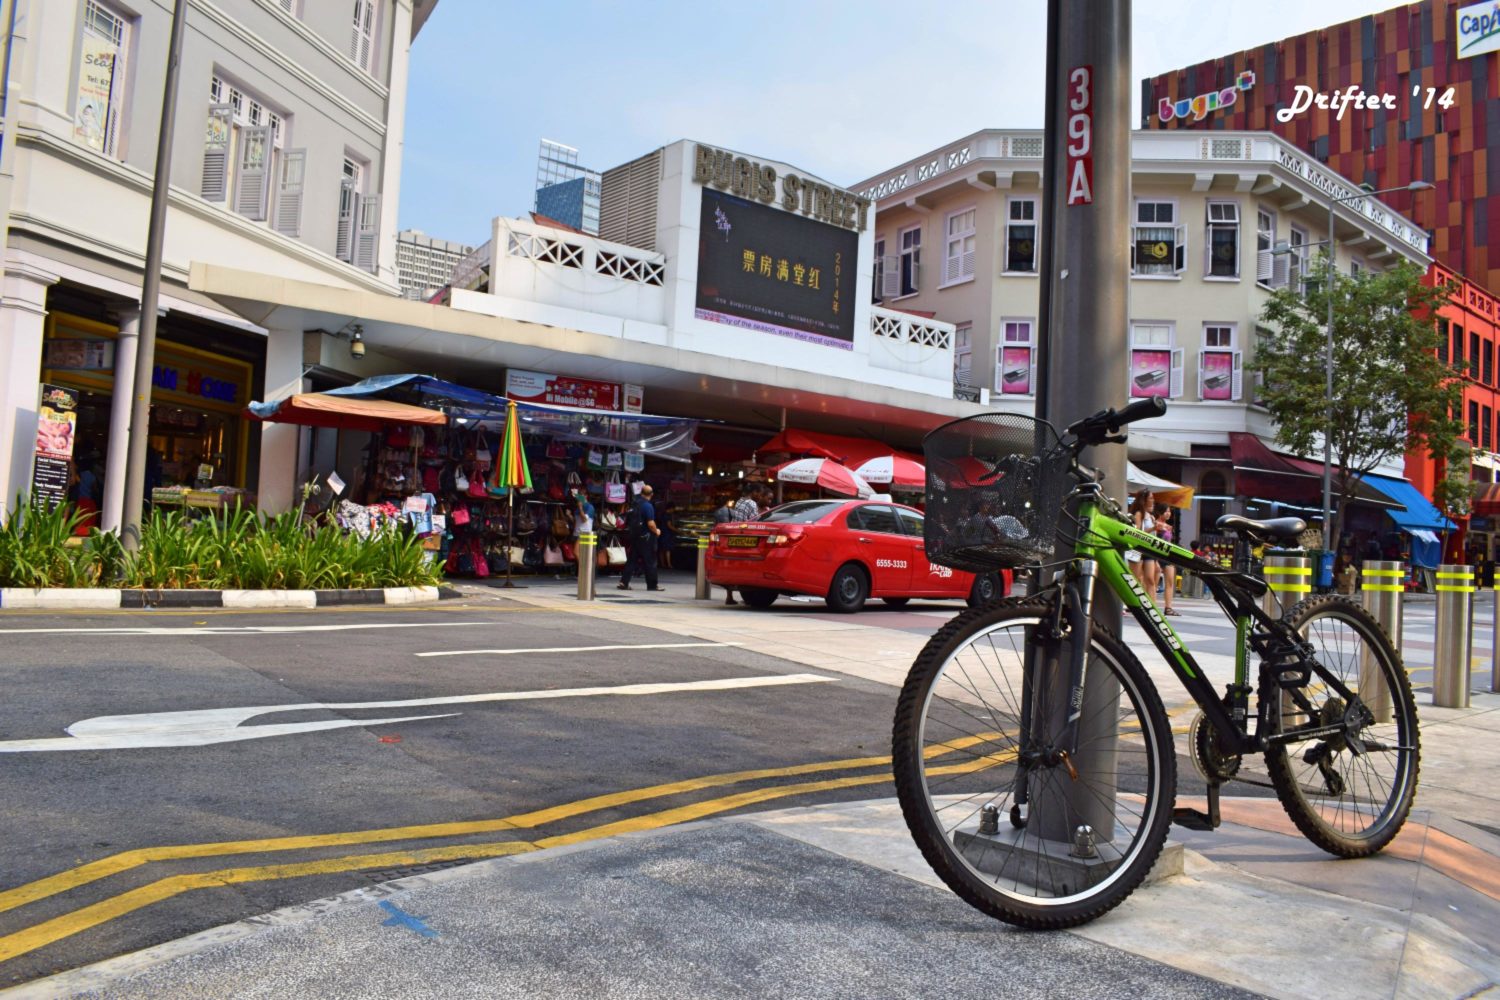 In Singapore, nobody dares to steal a bicycle. CCTVs are everywhere.